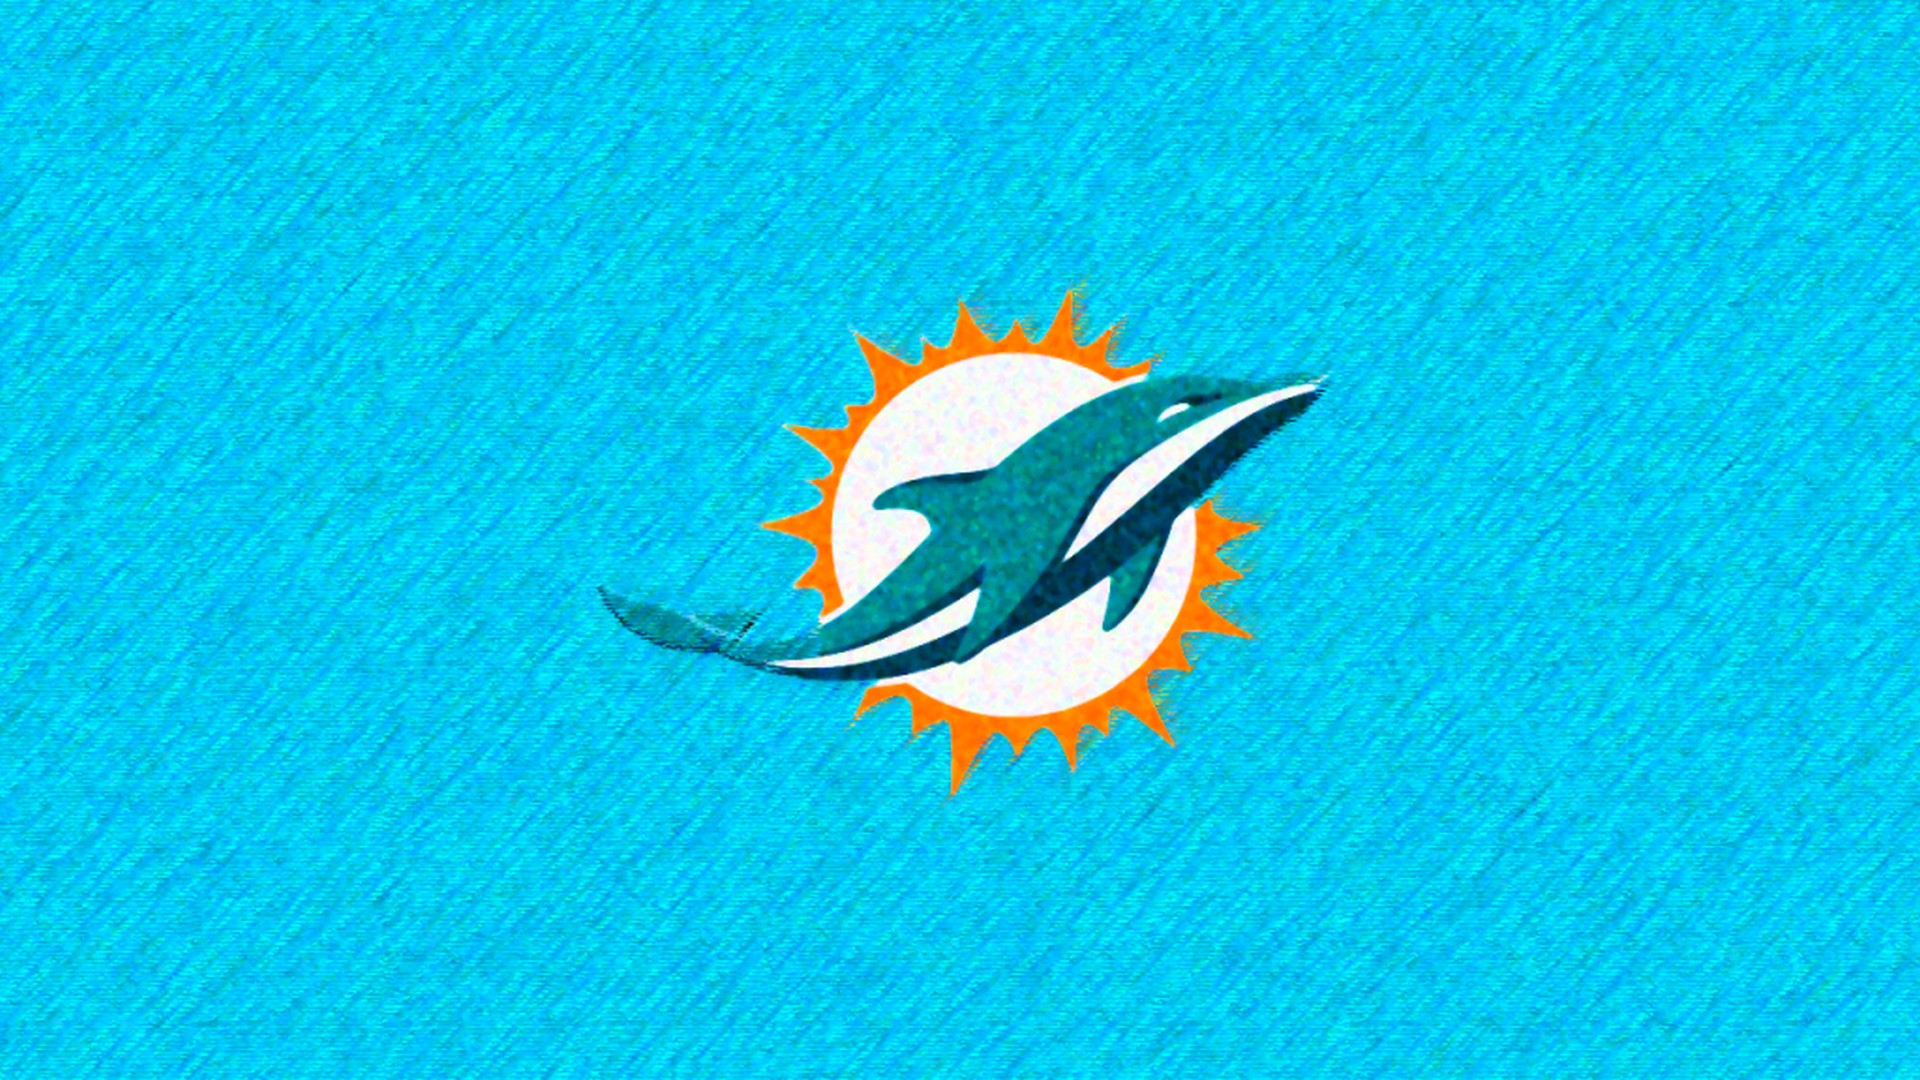 HD Miami Dolphins Backgrounds With Resolution 1920X1080 pixel. You can make this wallpaper for your Mac or Windows Desktop Background, iPhone, Android or Tablet and another Smartphone device for free